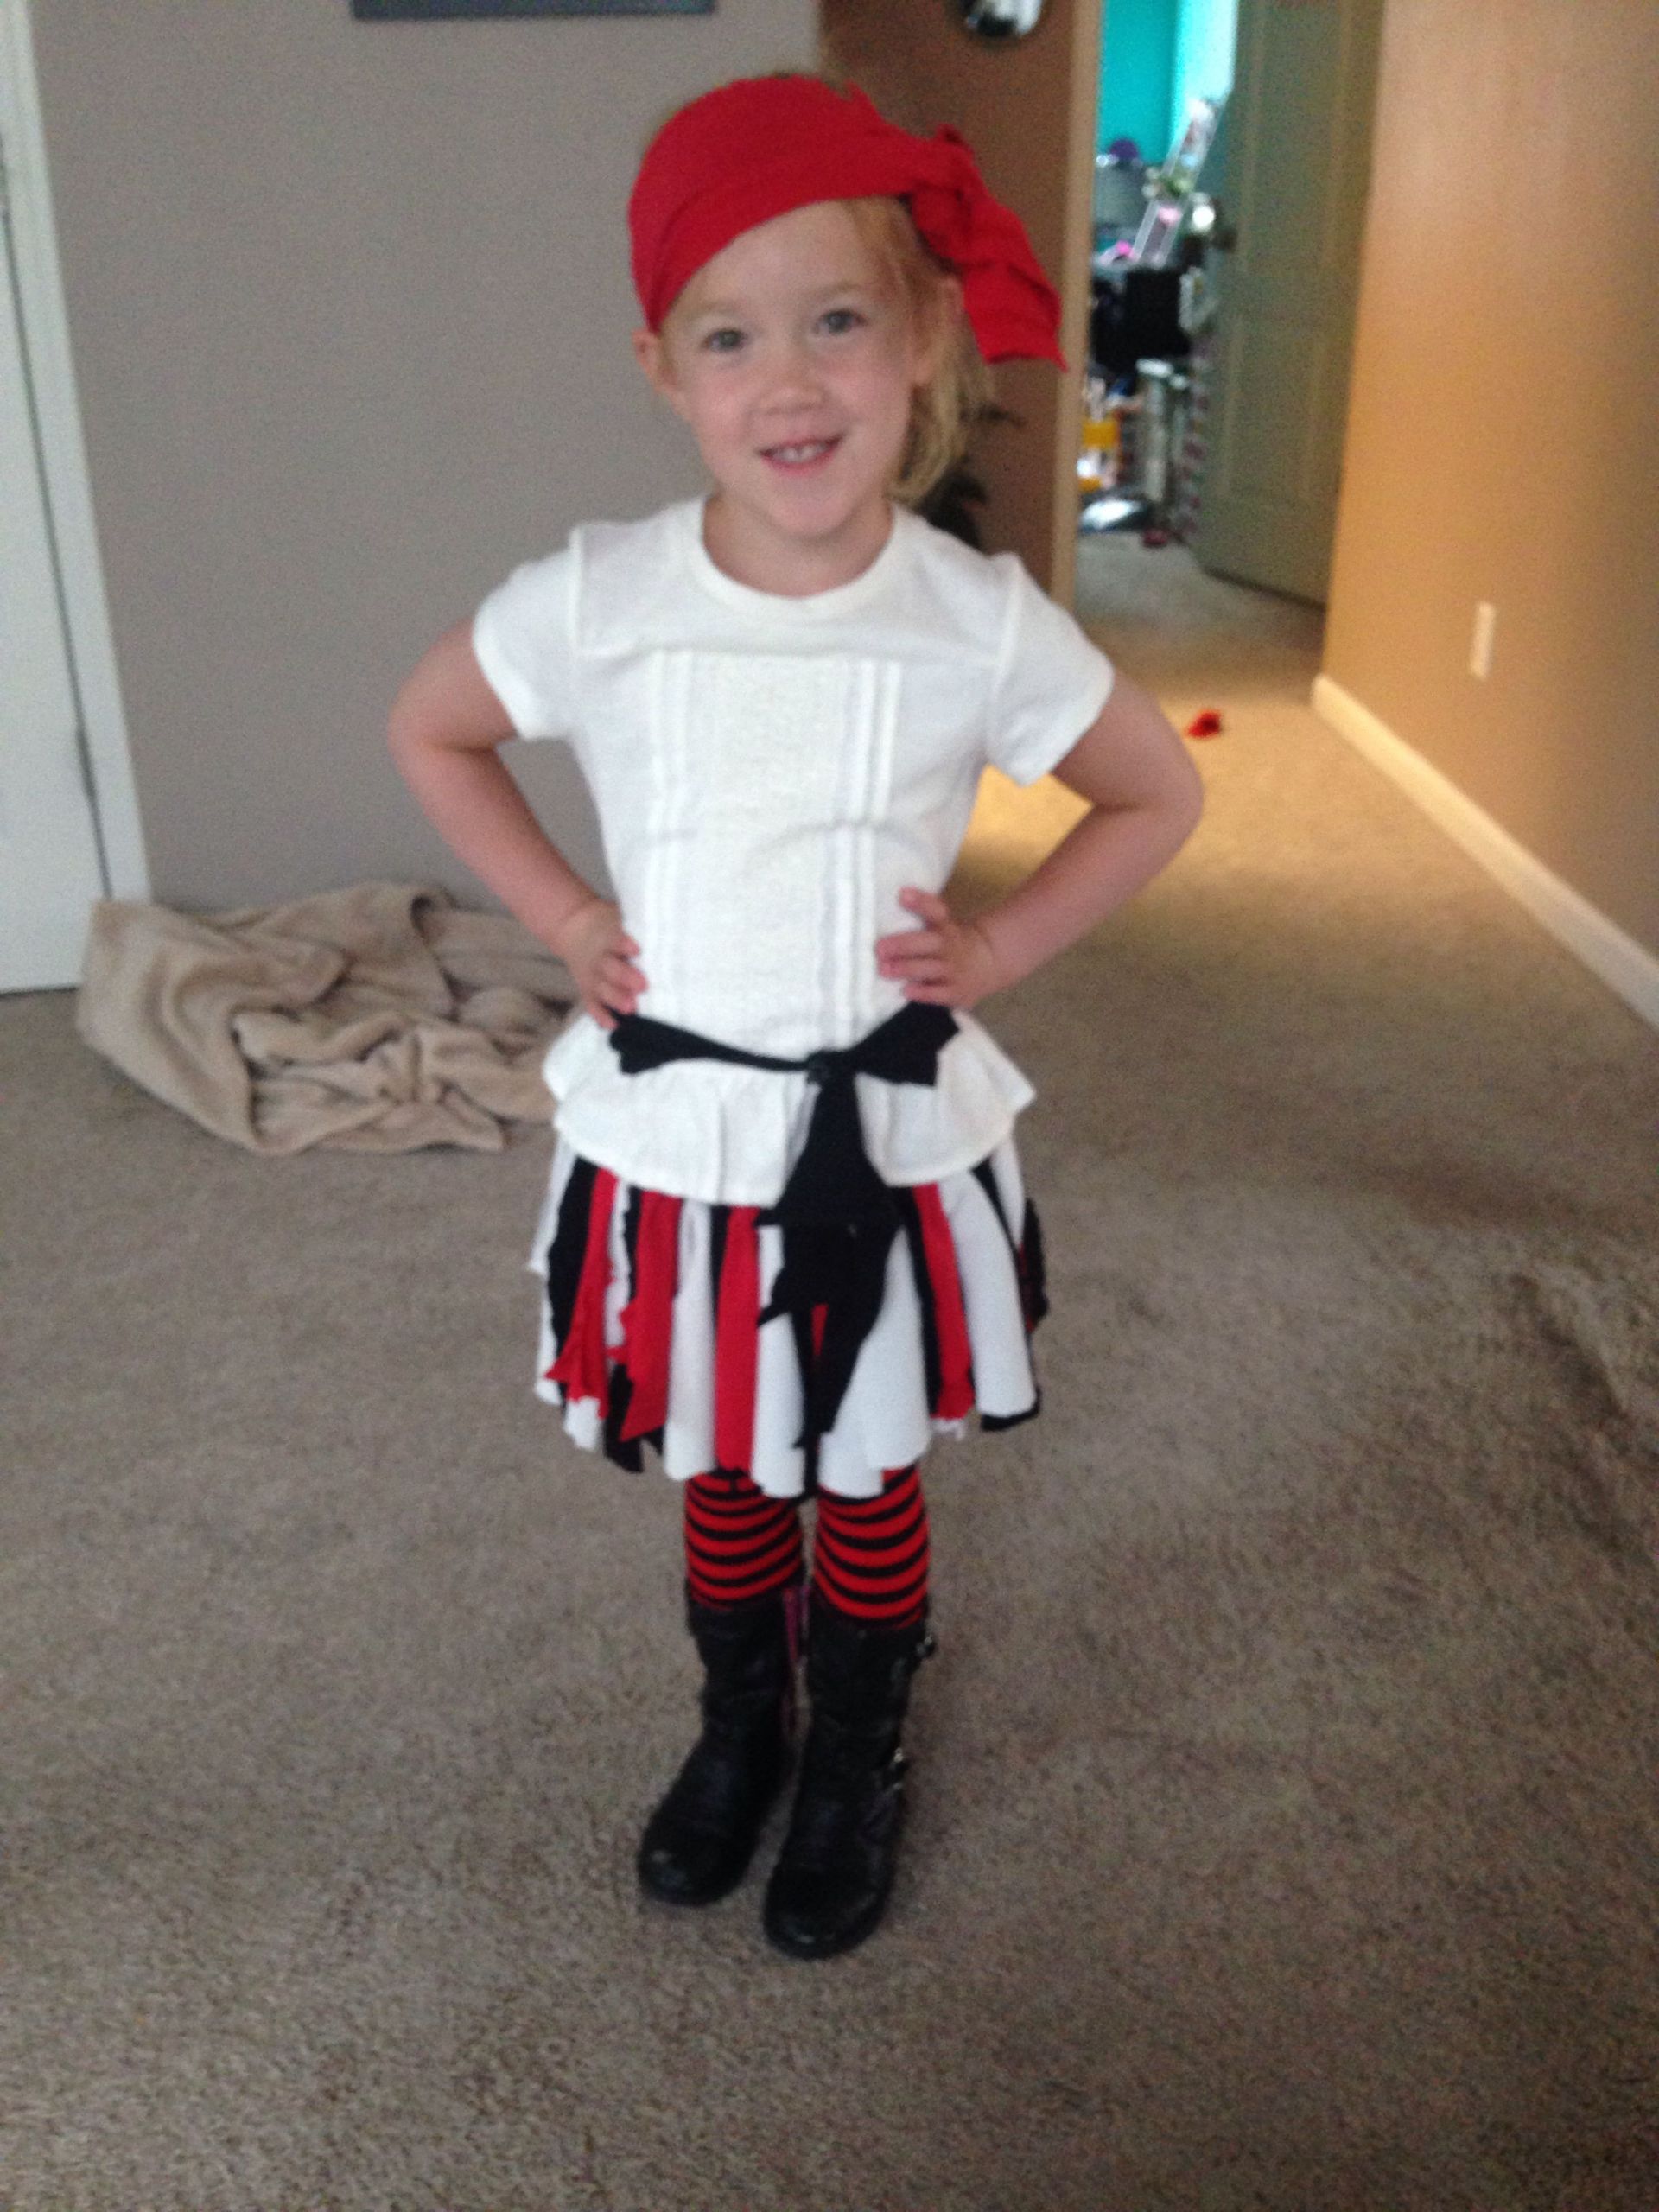 DIY Toddler Pirate Costume
 DIY girl pirate costume Old tshirtswere used to make the